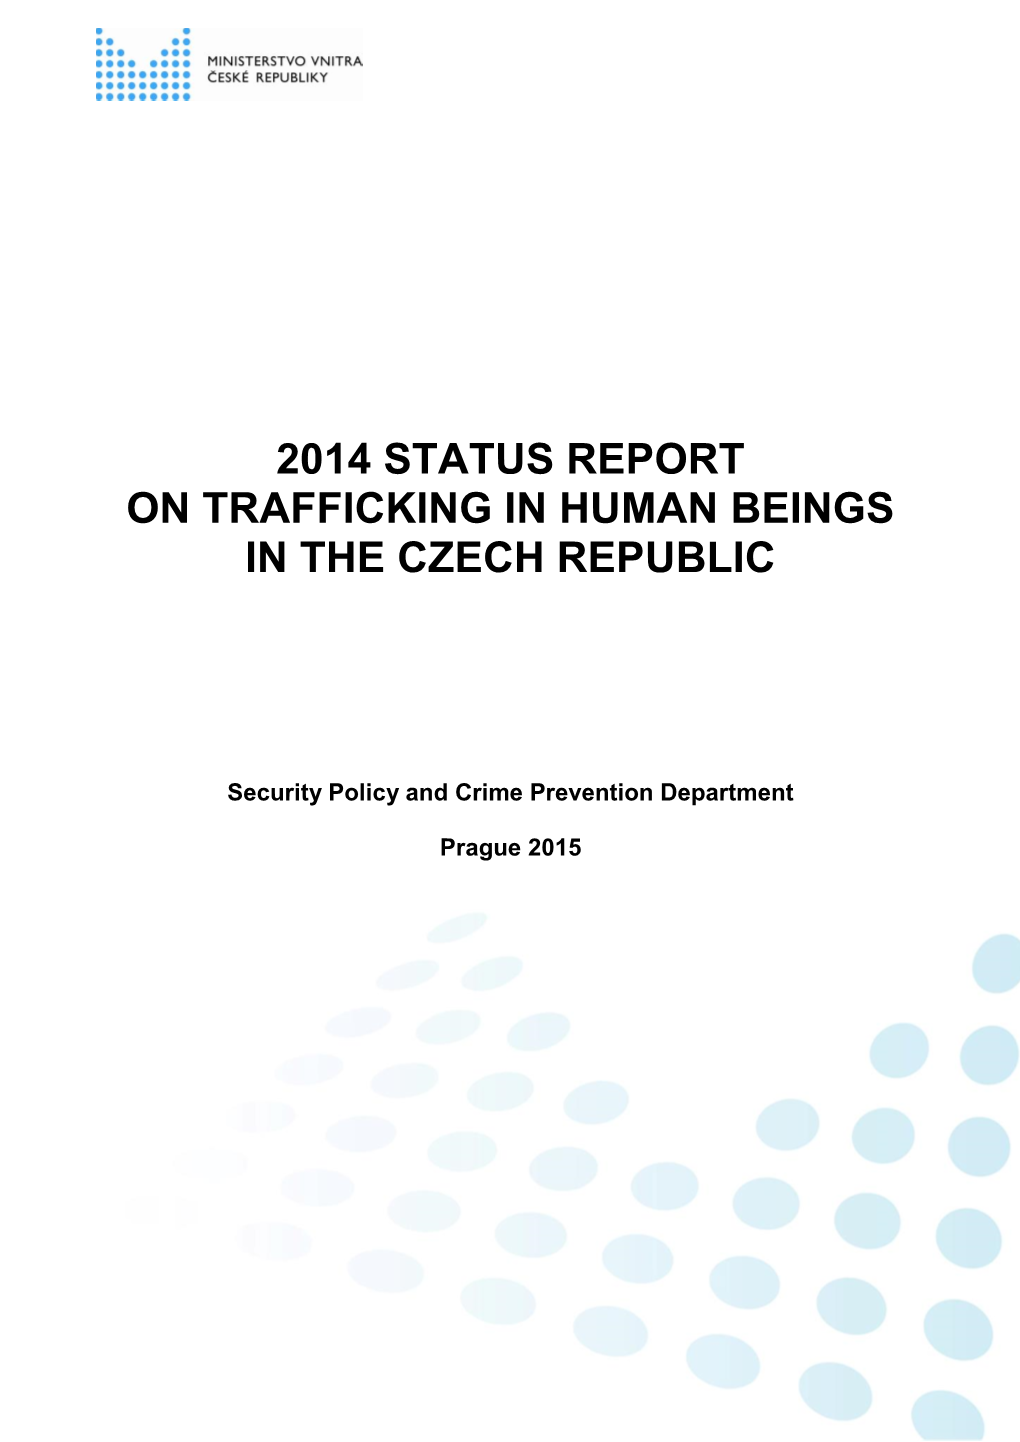 2014 Status Report on Trafficking in Human Beings in the Czech Republic